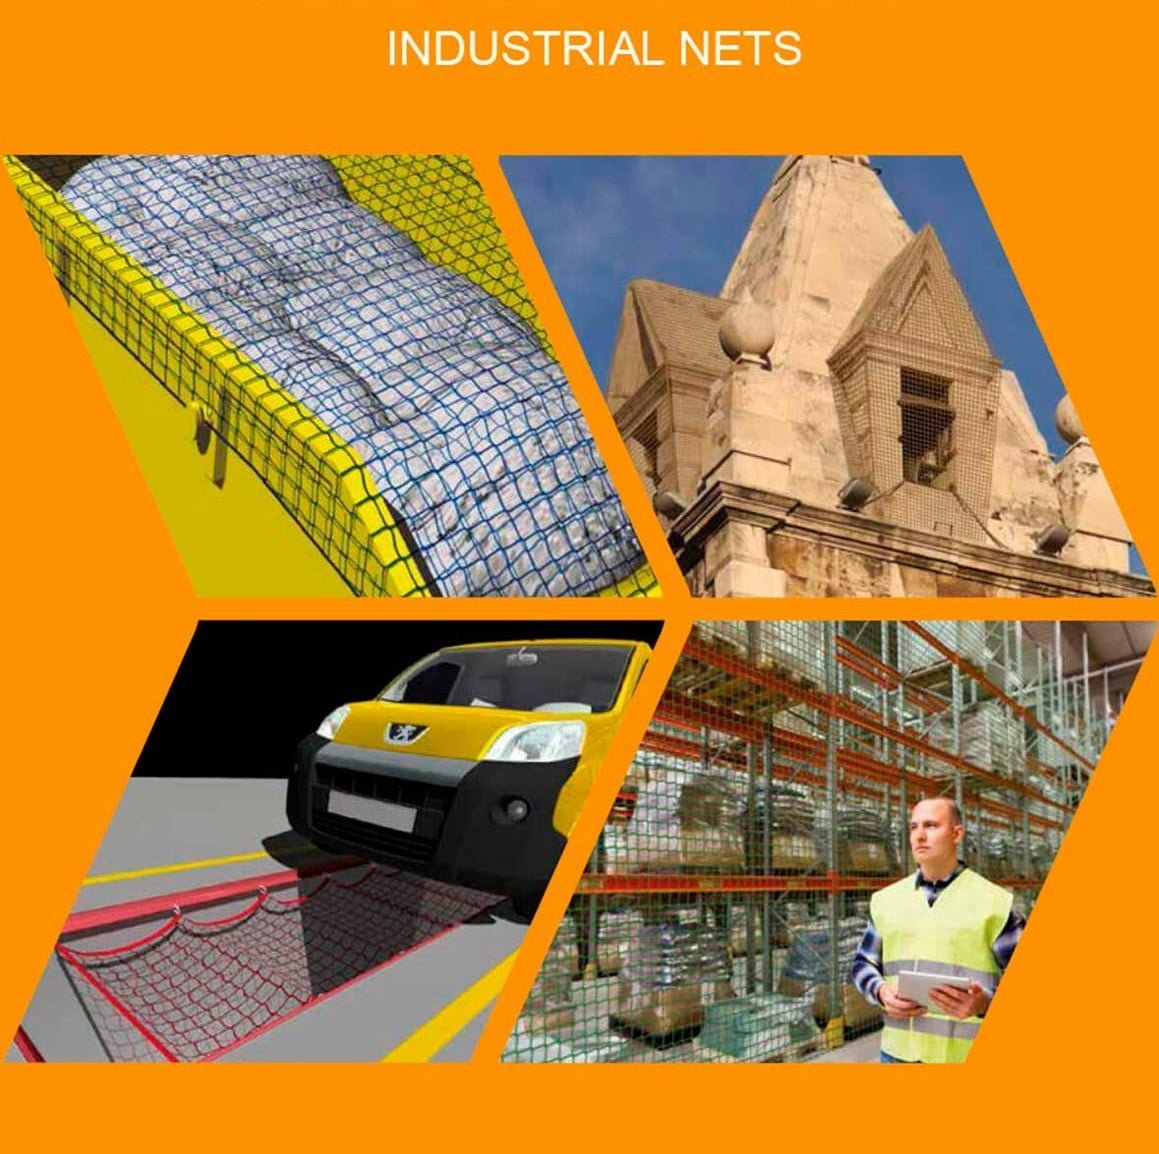 Cago and industrial nets